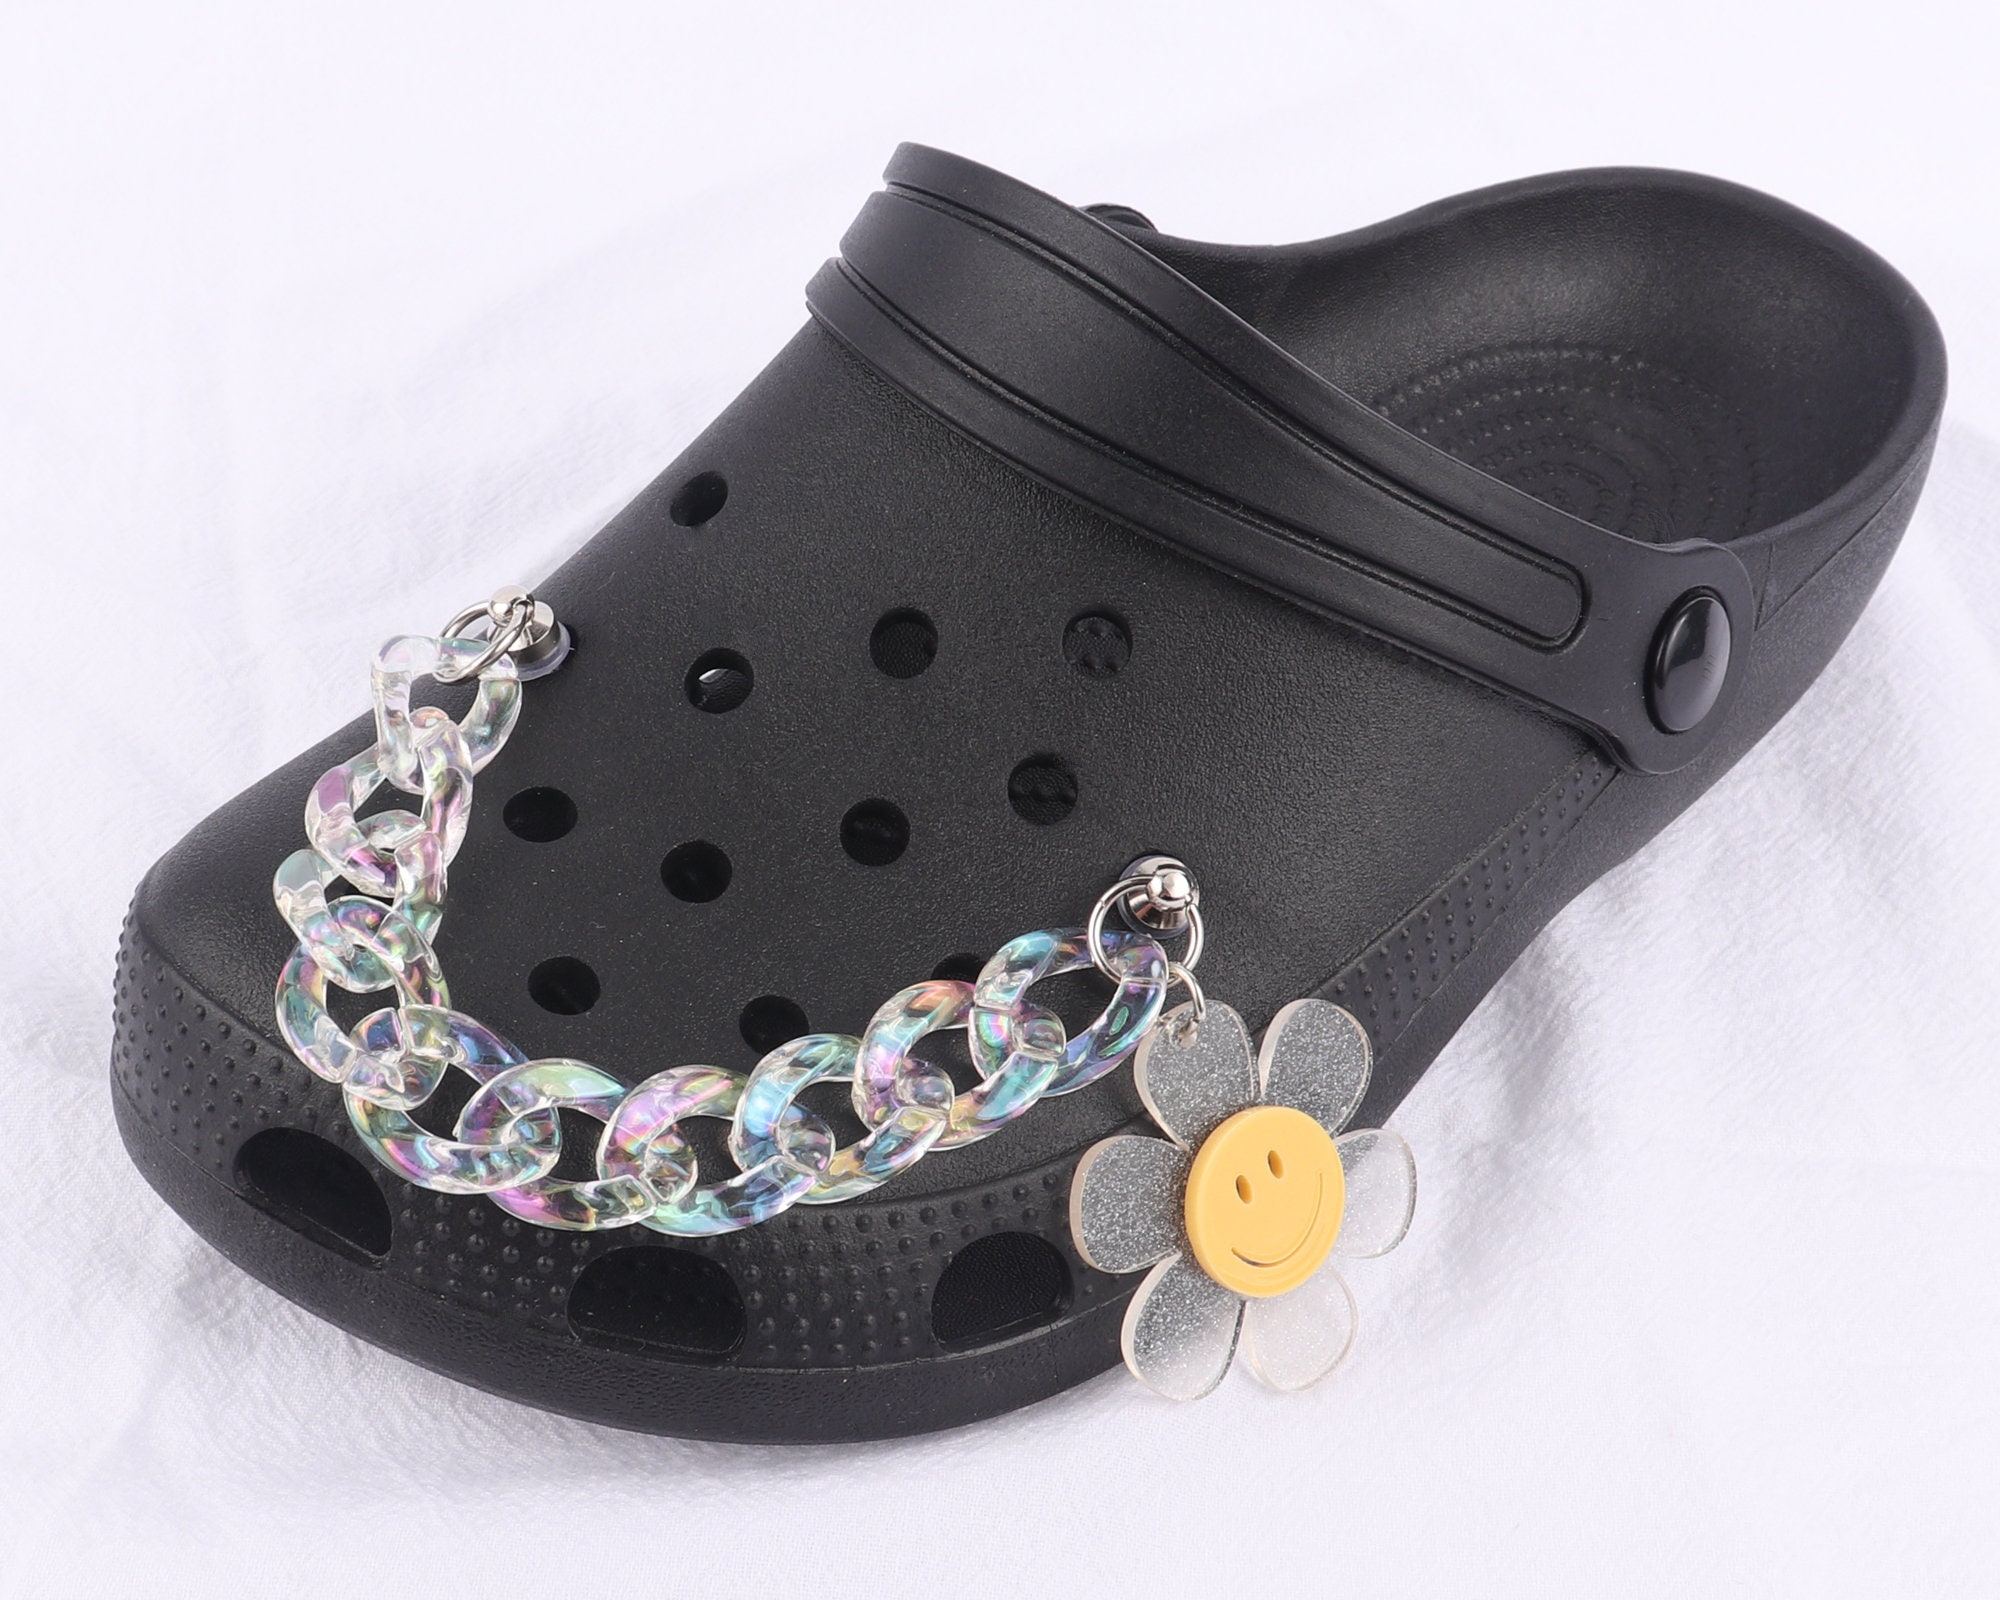  Bling Croc Charms for Women Girls,Golden Bling Shoe Charms for  Croc Sandals,Bling Chain Charm Shoes Accessories Shoe Decorations for  Birthday Gifts Party Favors : Clothing, Shoes & Jewelry